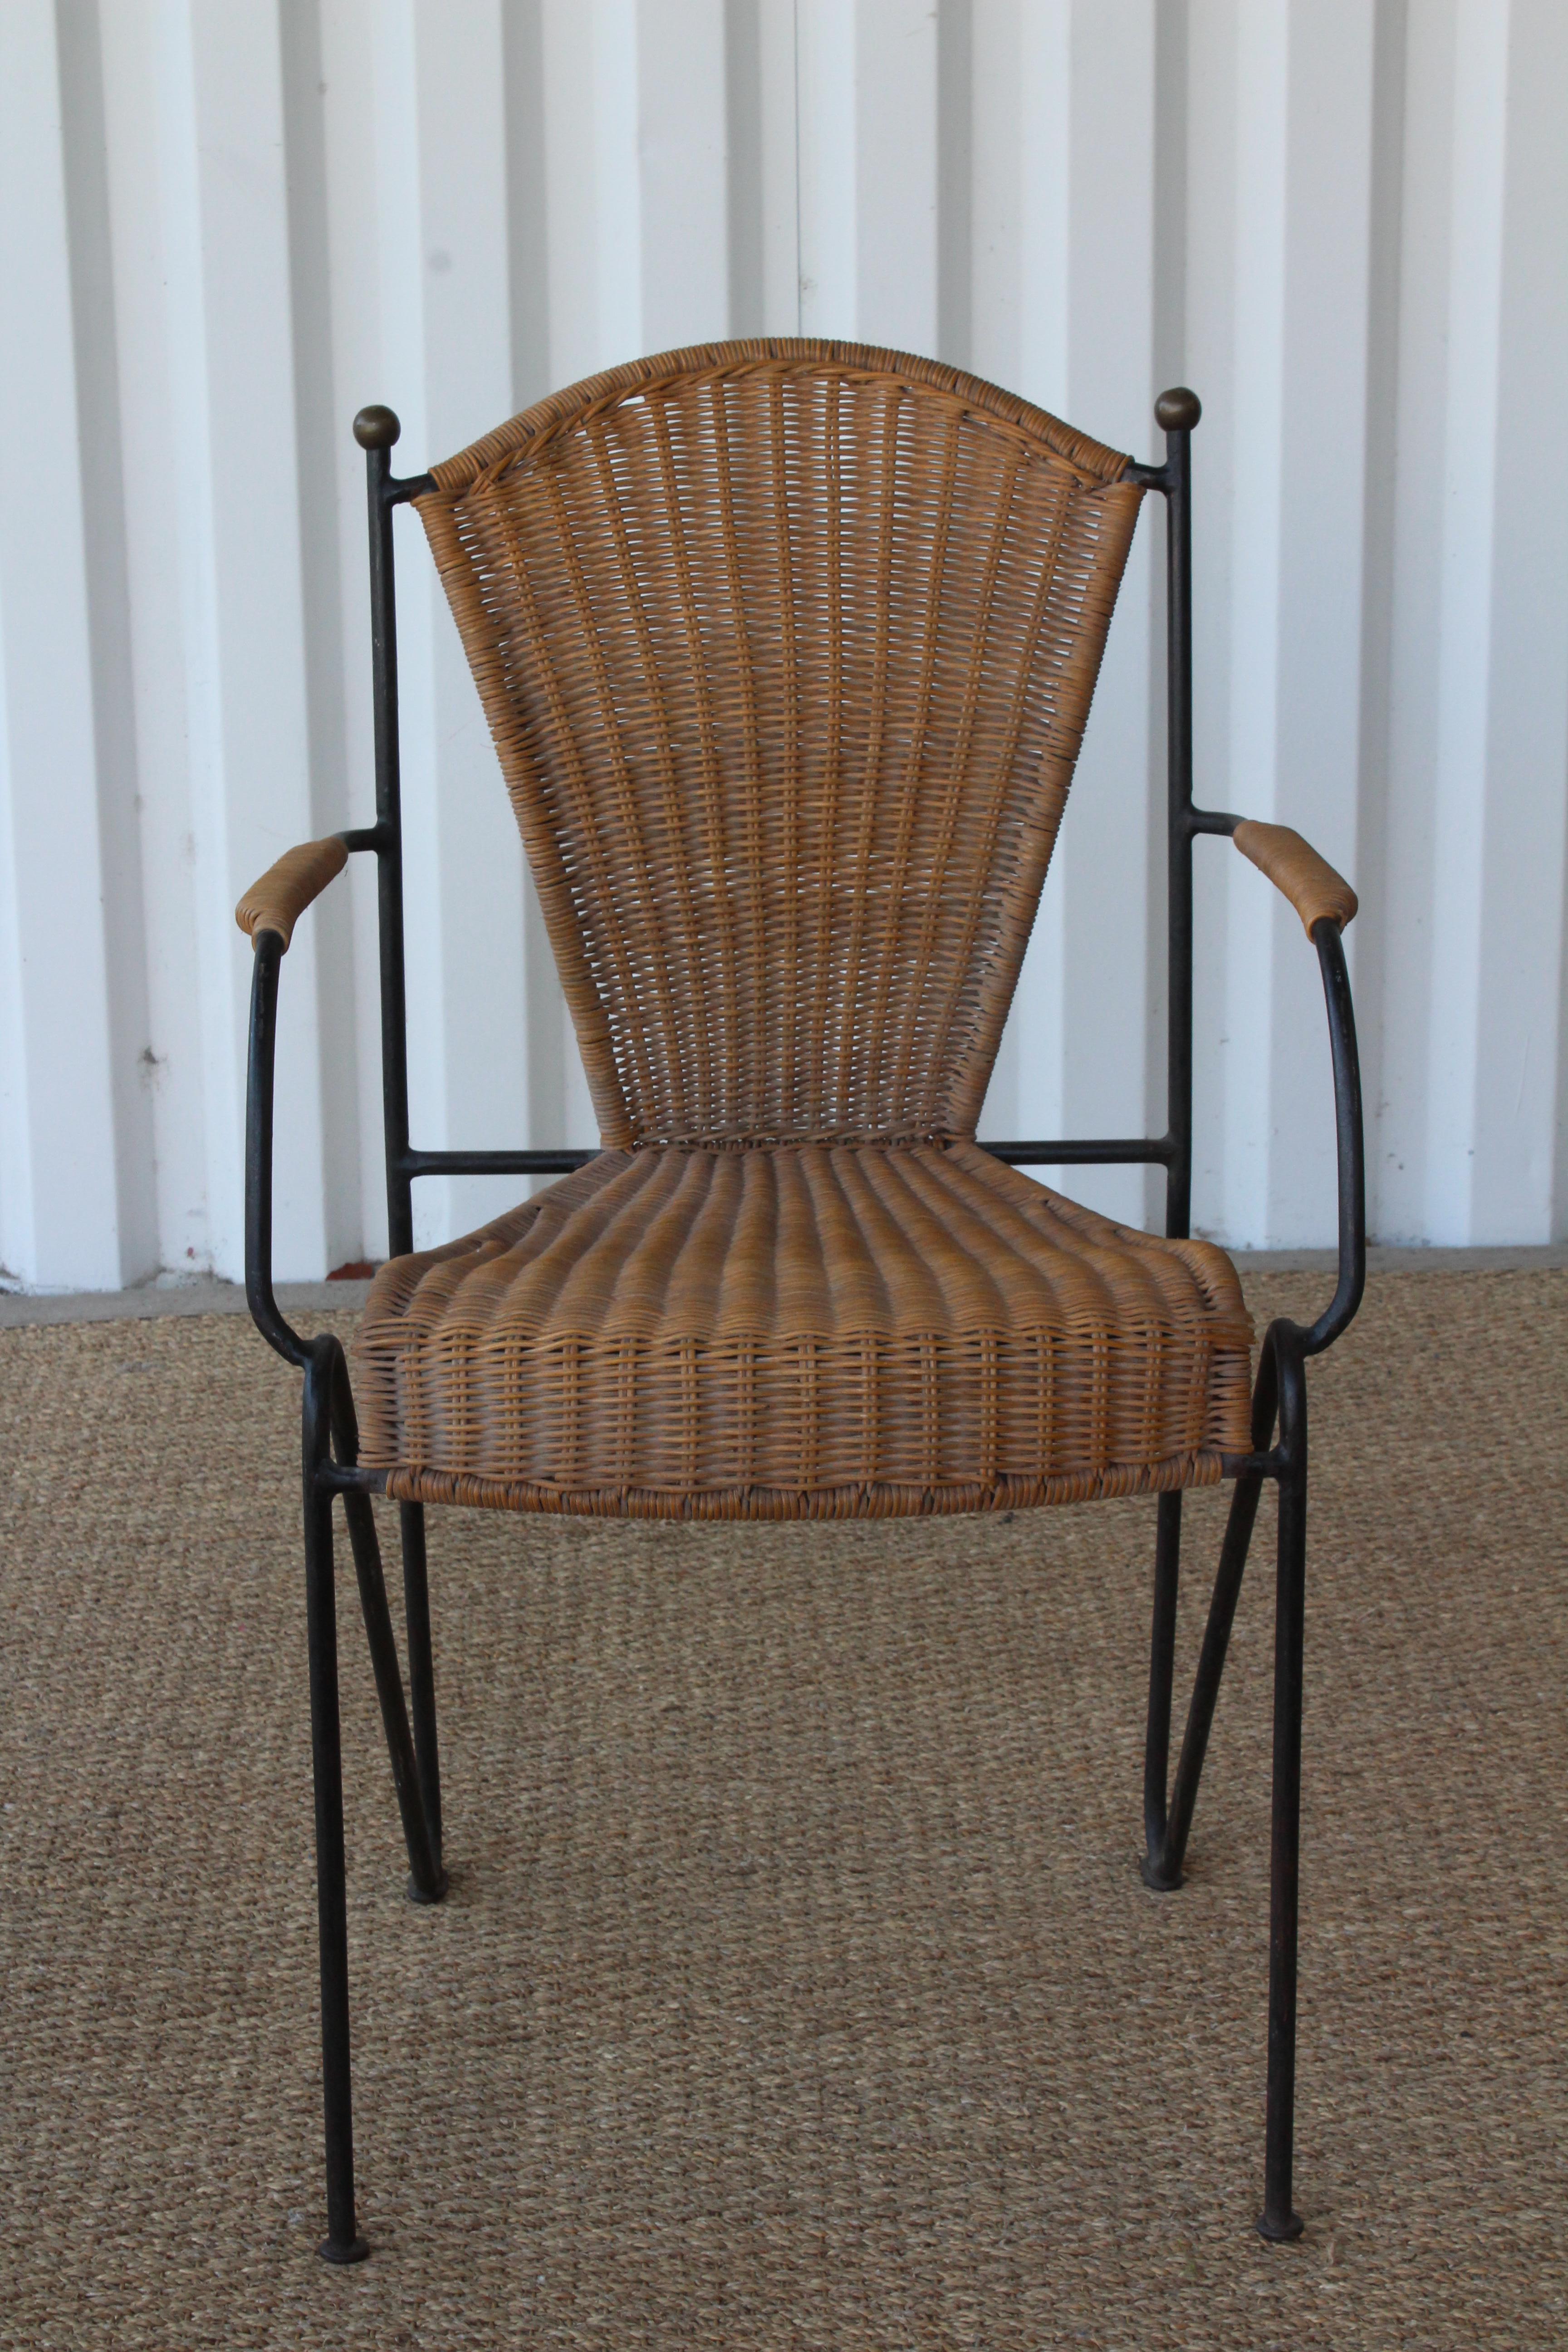 Vintage iron and woven wicker armchair, France, 1950s. New handwoven wicker. Brass ball details on the back. In overall excellent condition. Measures: 25